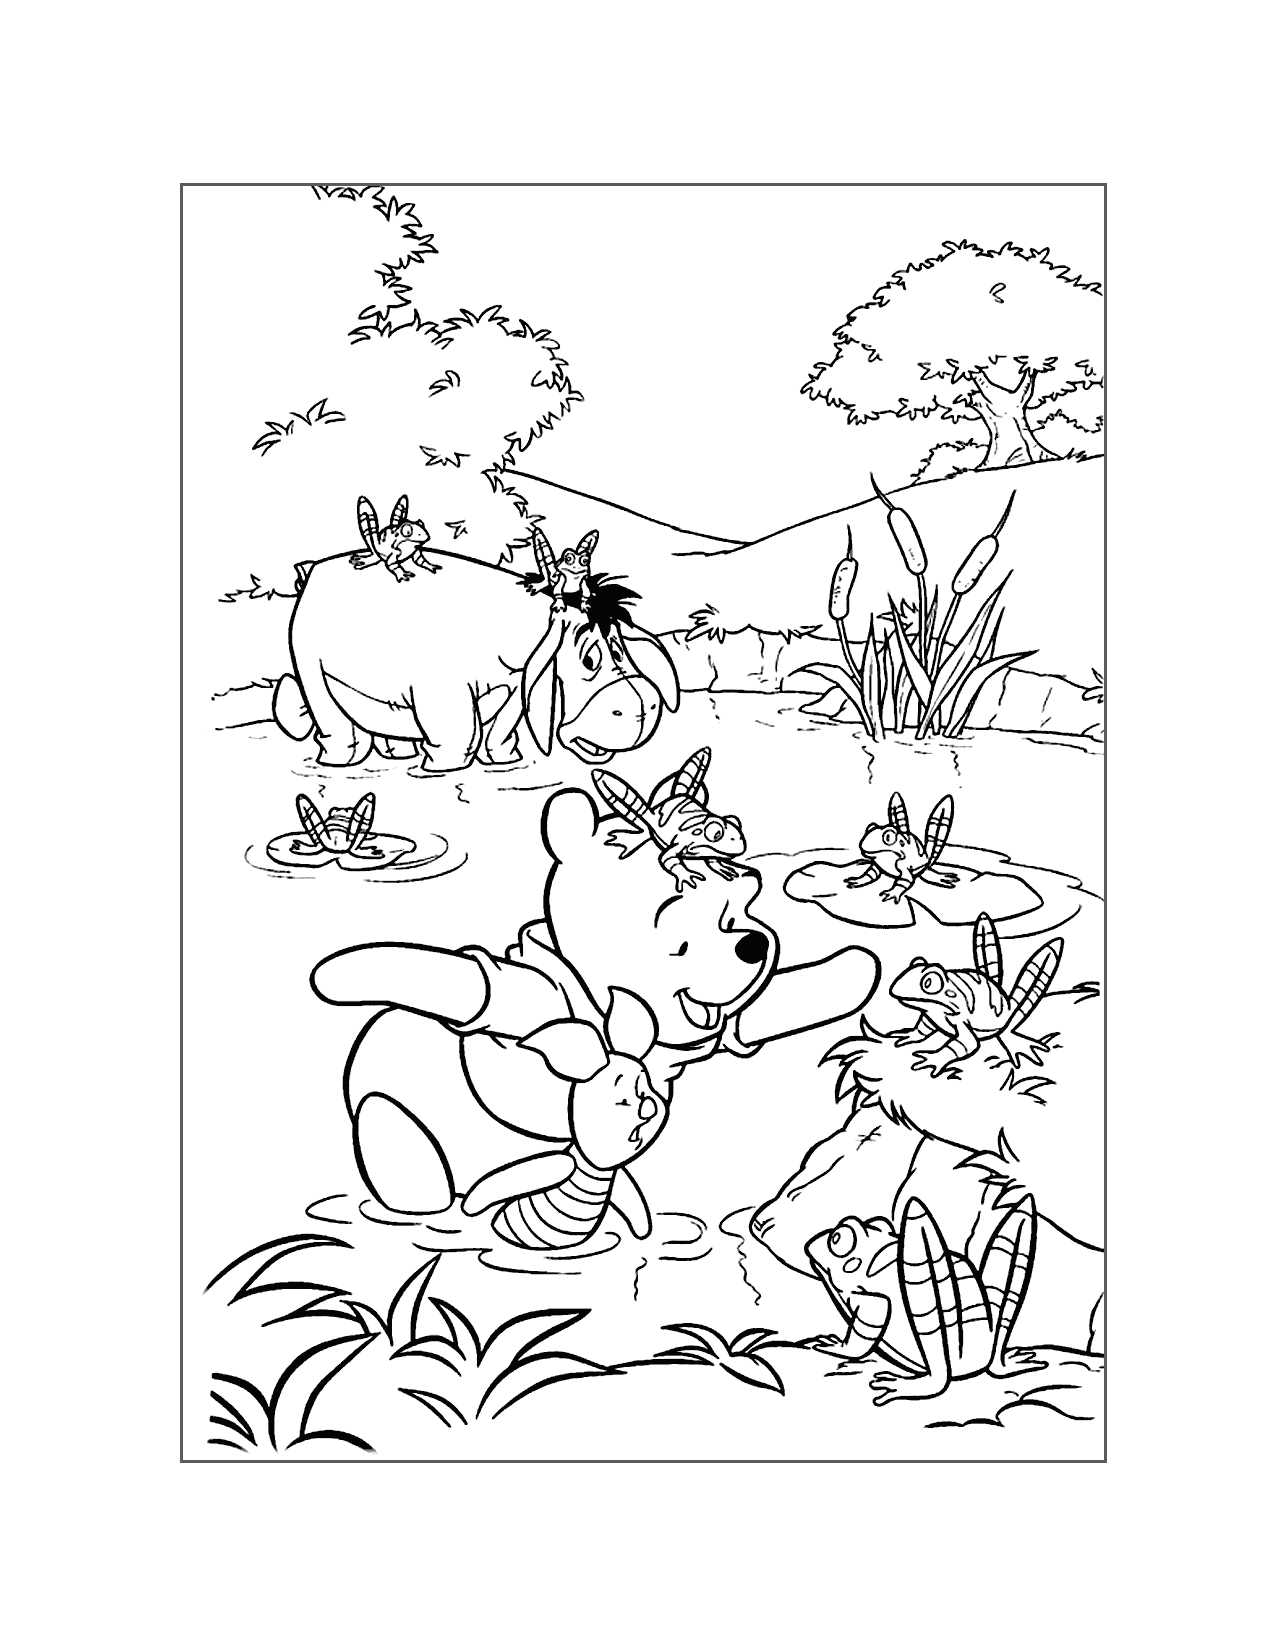 Eeyore And Pooh In The Frog Pond Coloring Page